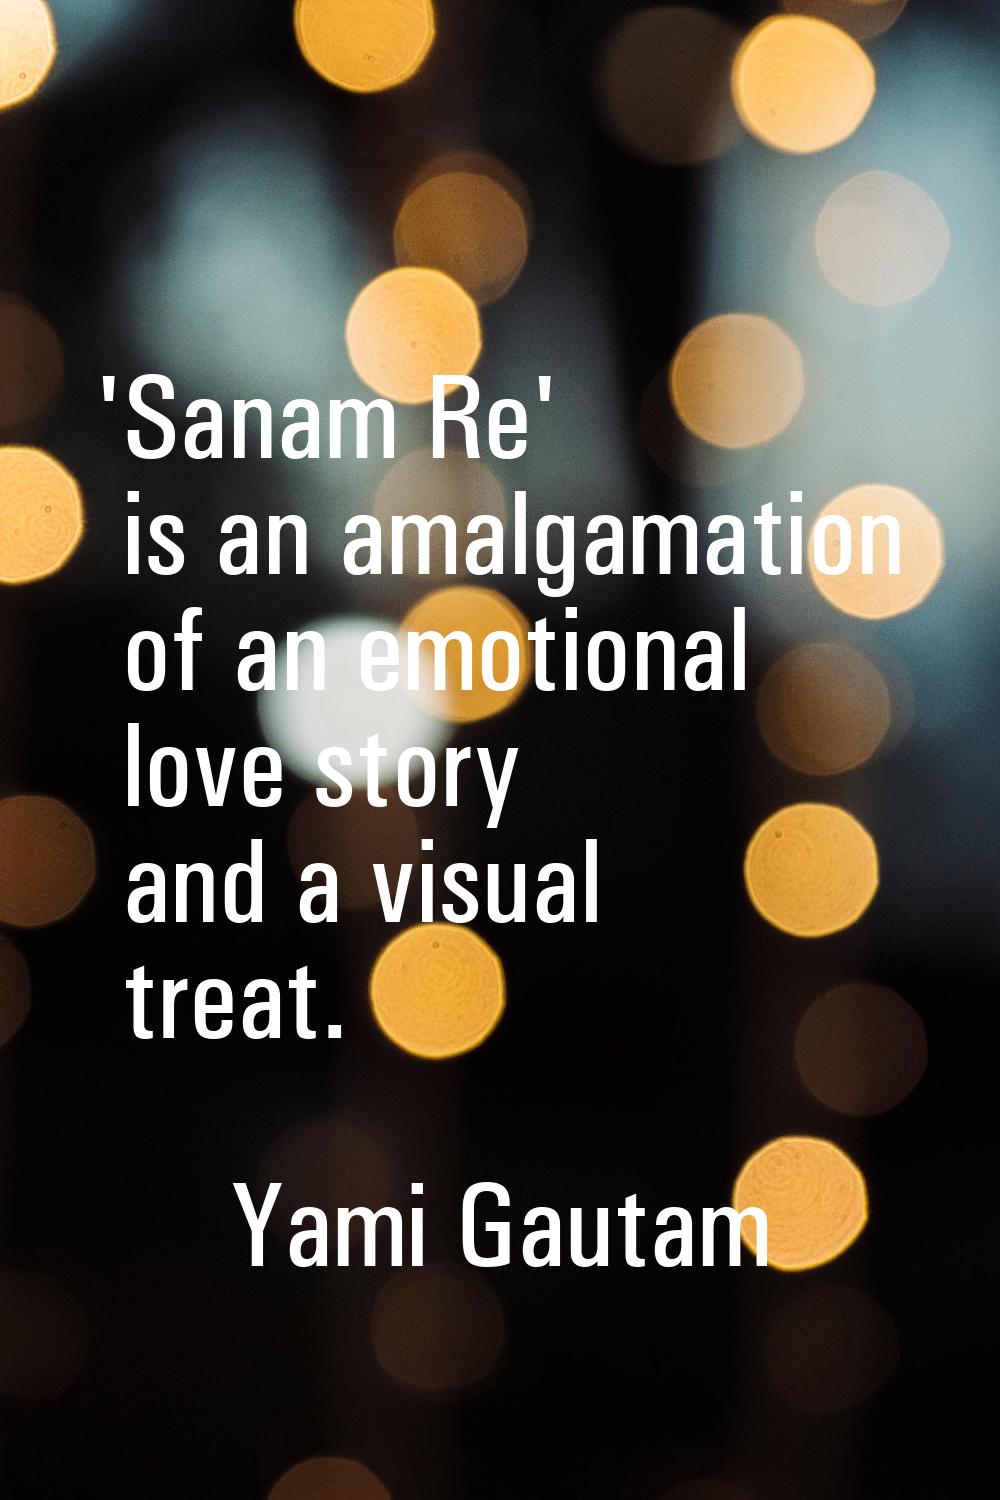 'Sanam Re' is an amalgamation of an emotional love story and a visual treat.